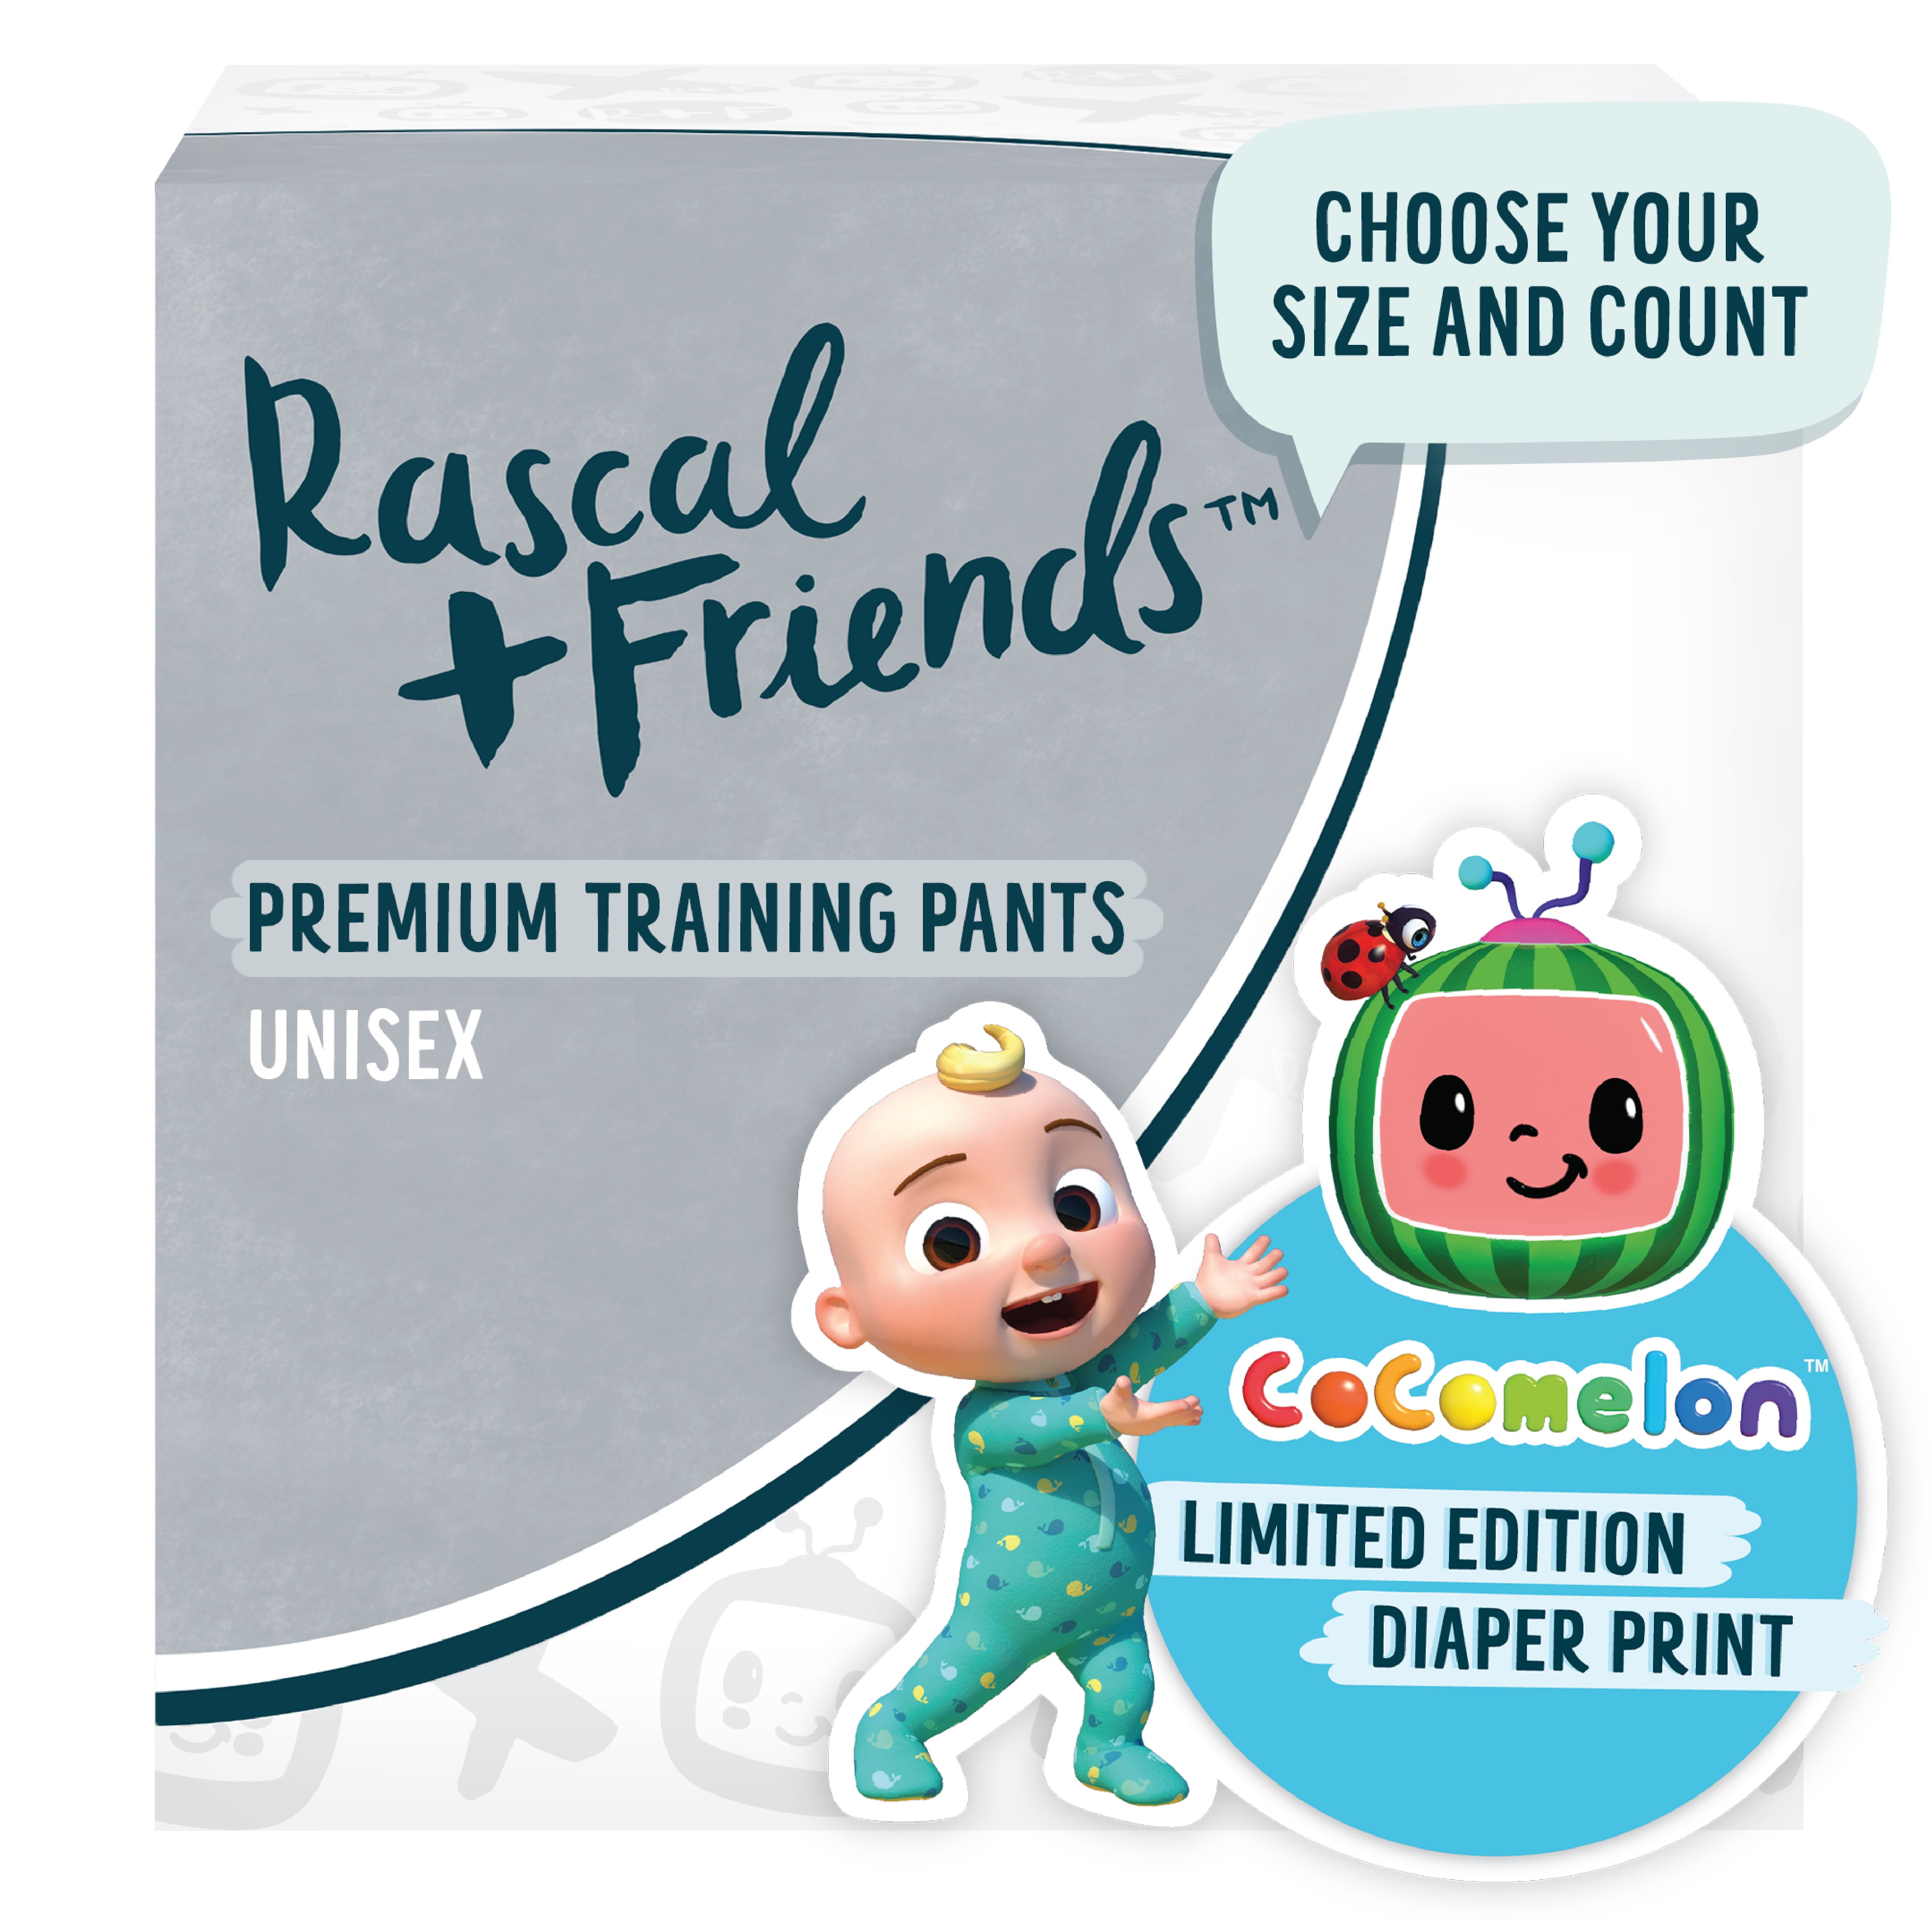 Rascal + Friends Cocomelon Edition Training Pants (Choose Your Size and Count)